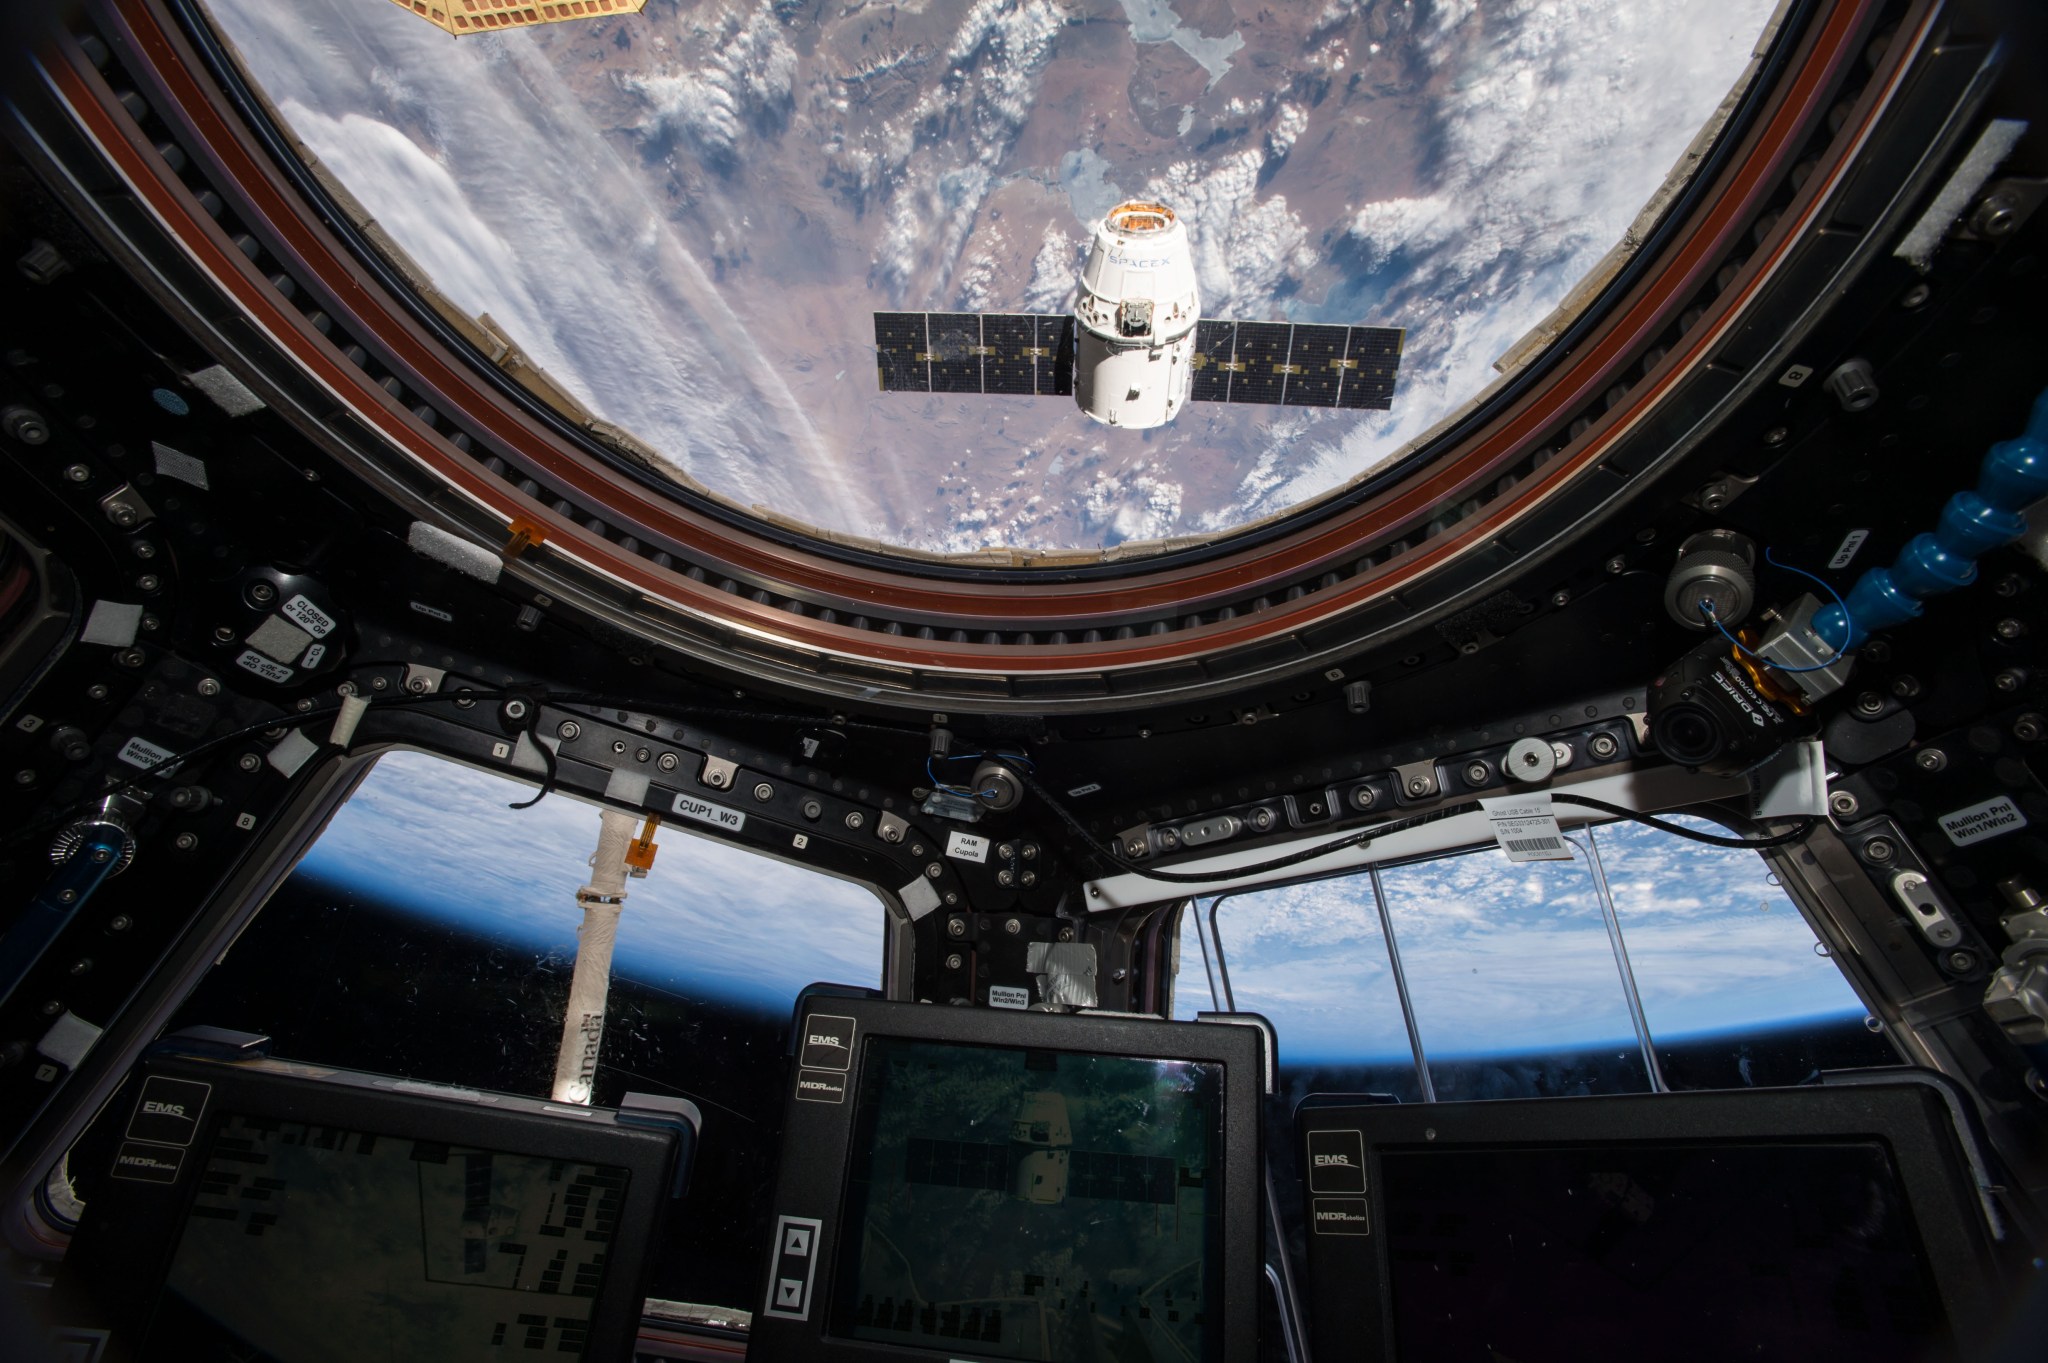 The Dragon spacecraft as seen from the cupola window on the International Space Station on April 10, 2016